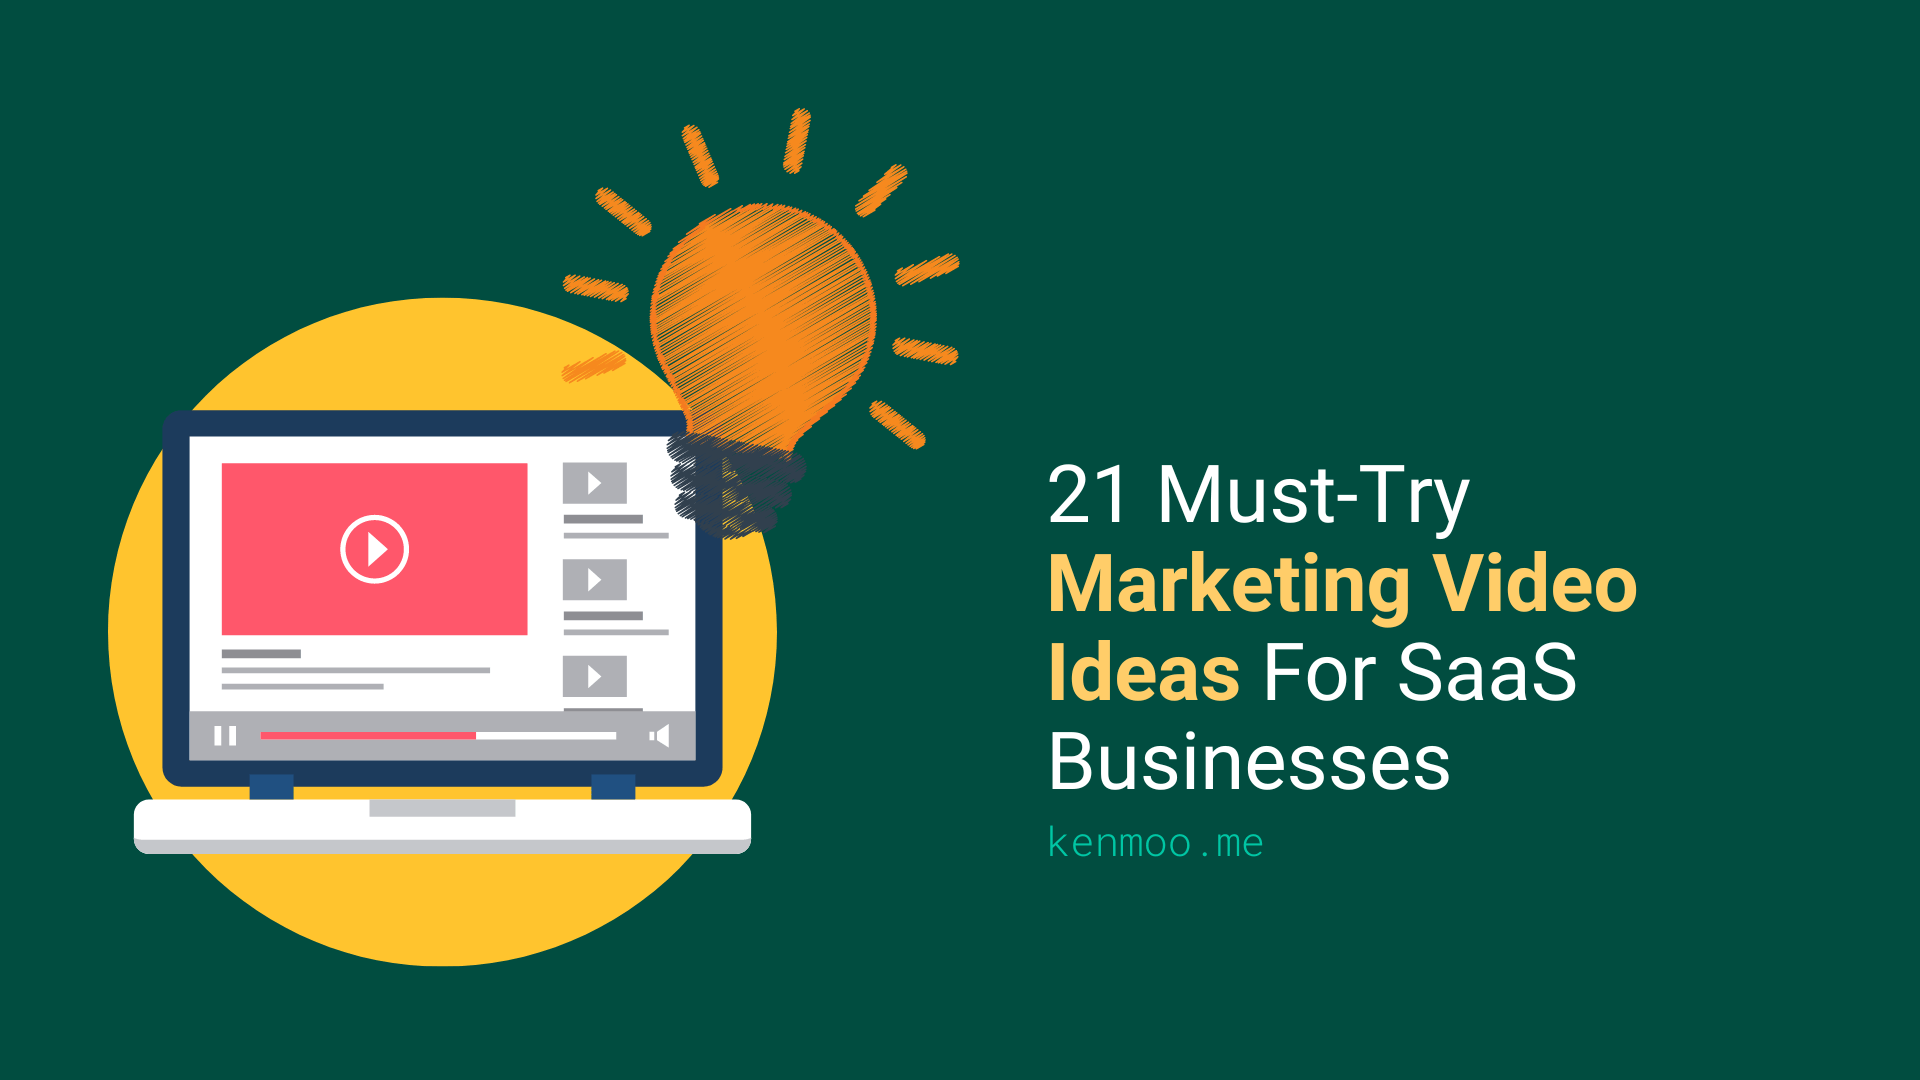 21 Must-Try Marketing Video Ideas For SaaS Businesses